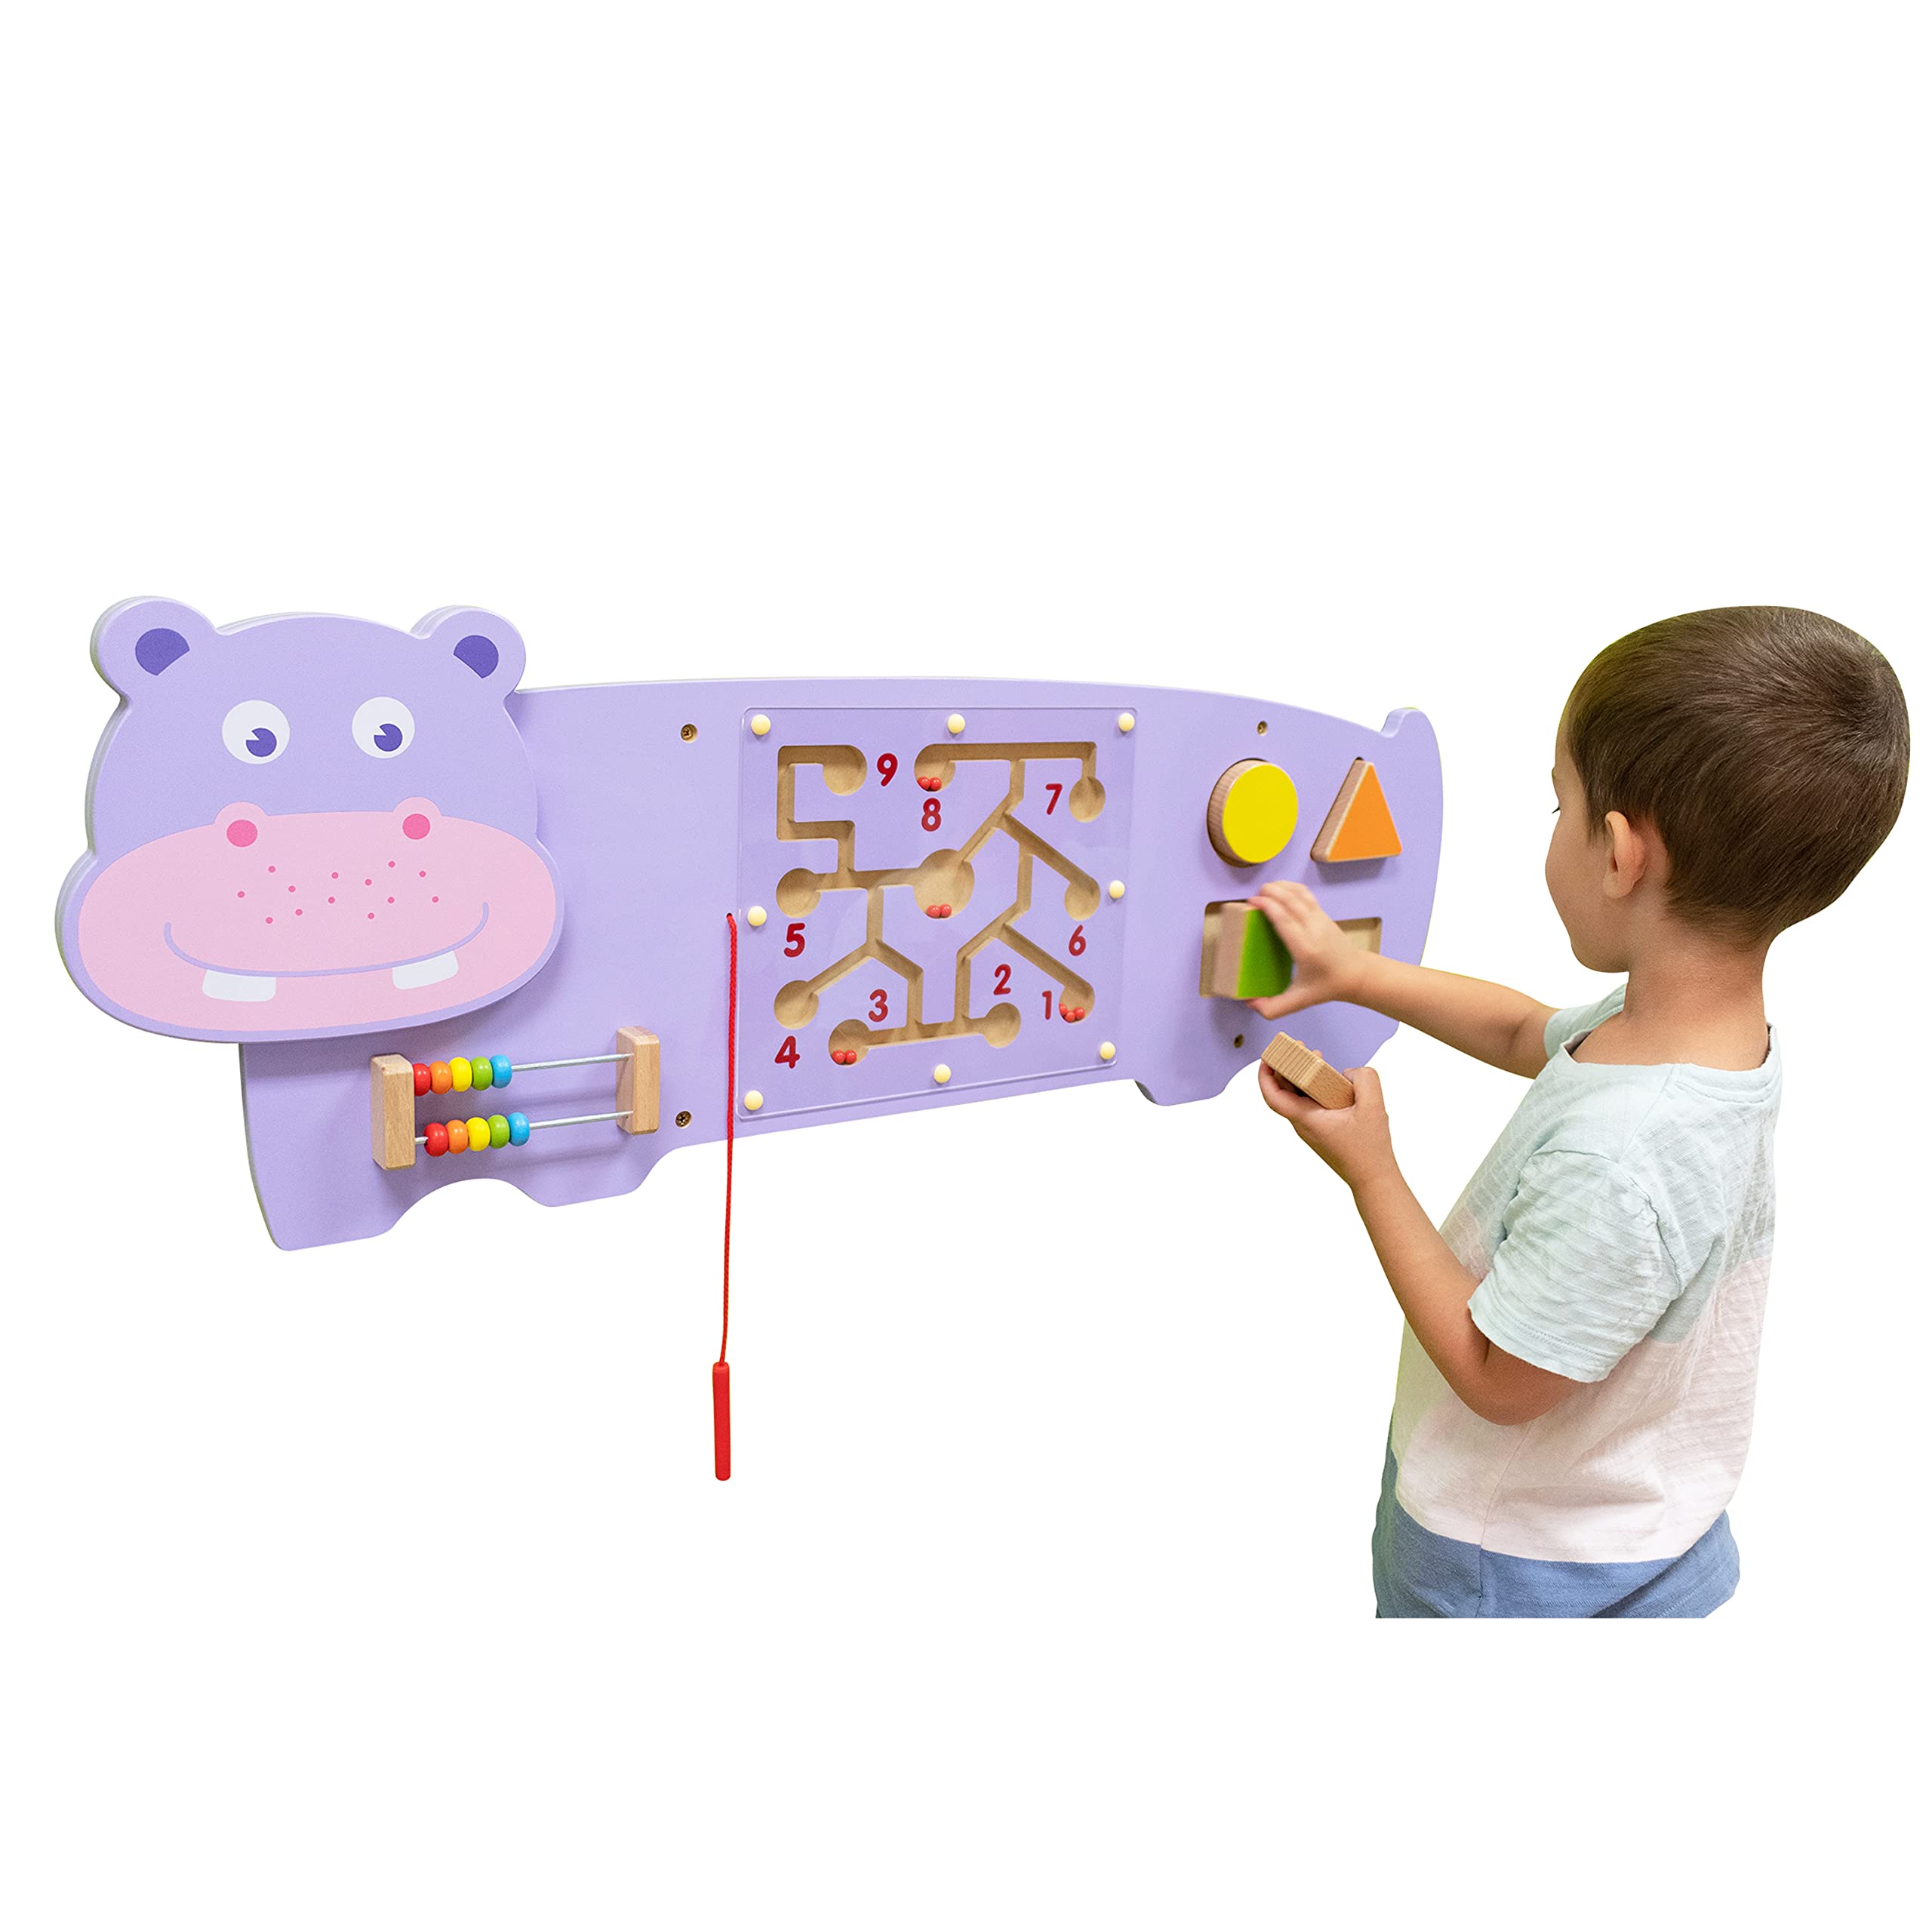 LEARNING ADVANTAGE Hippo Activity Wall Panel - 18m+ - Toddler Activity Center - Wall-Mounted Toy - Busy Board Decor for Bedrooms, Daycares and Play Areas